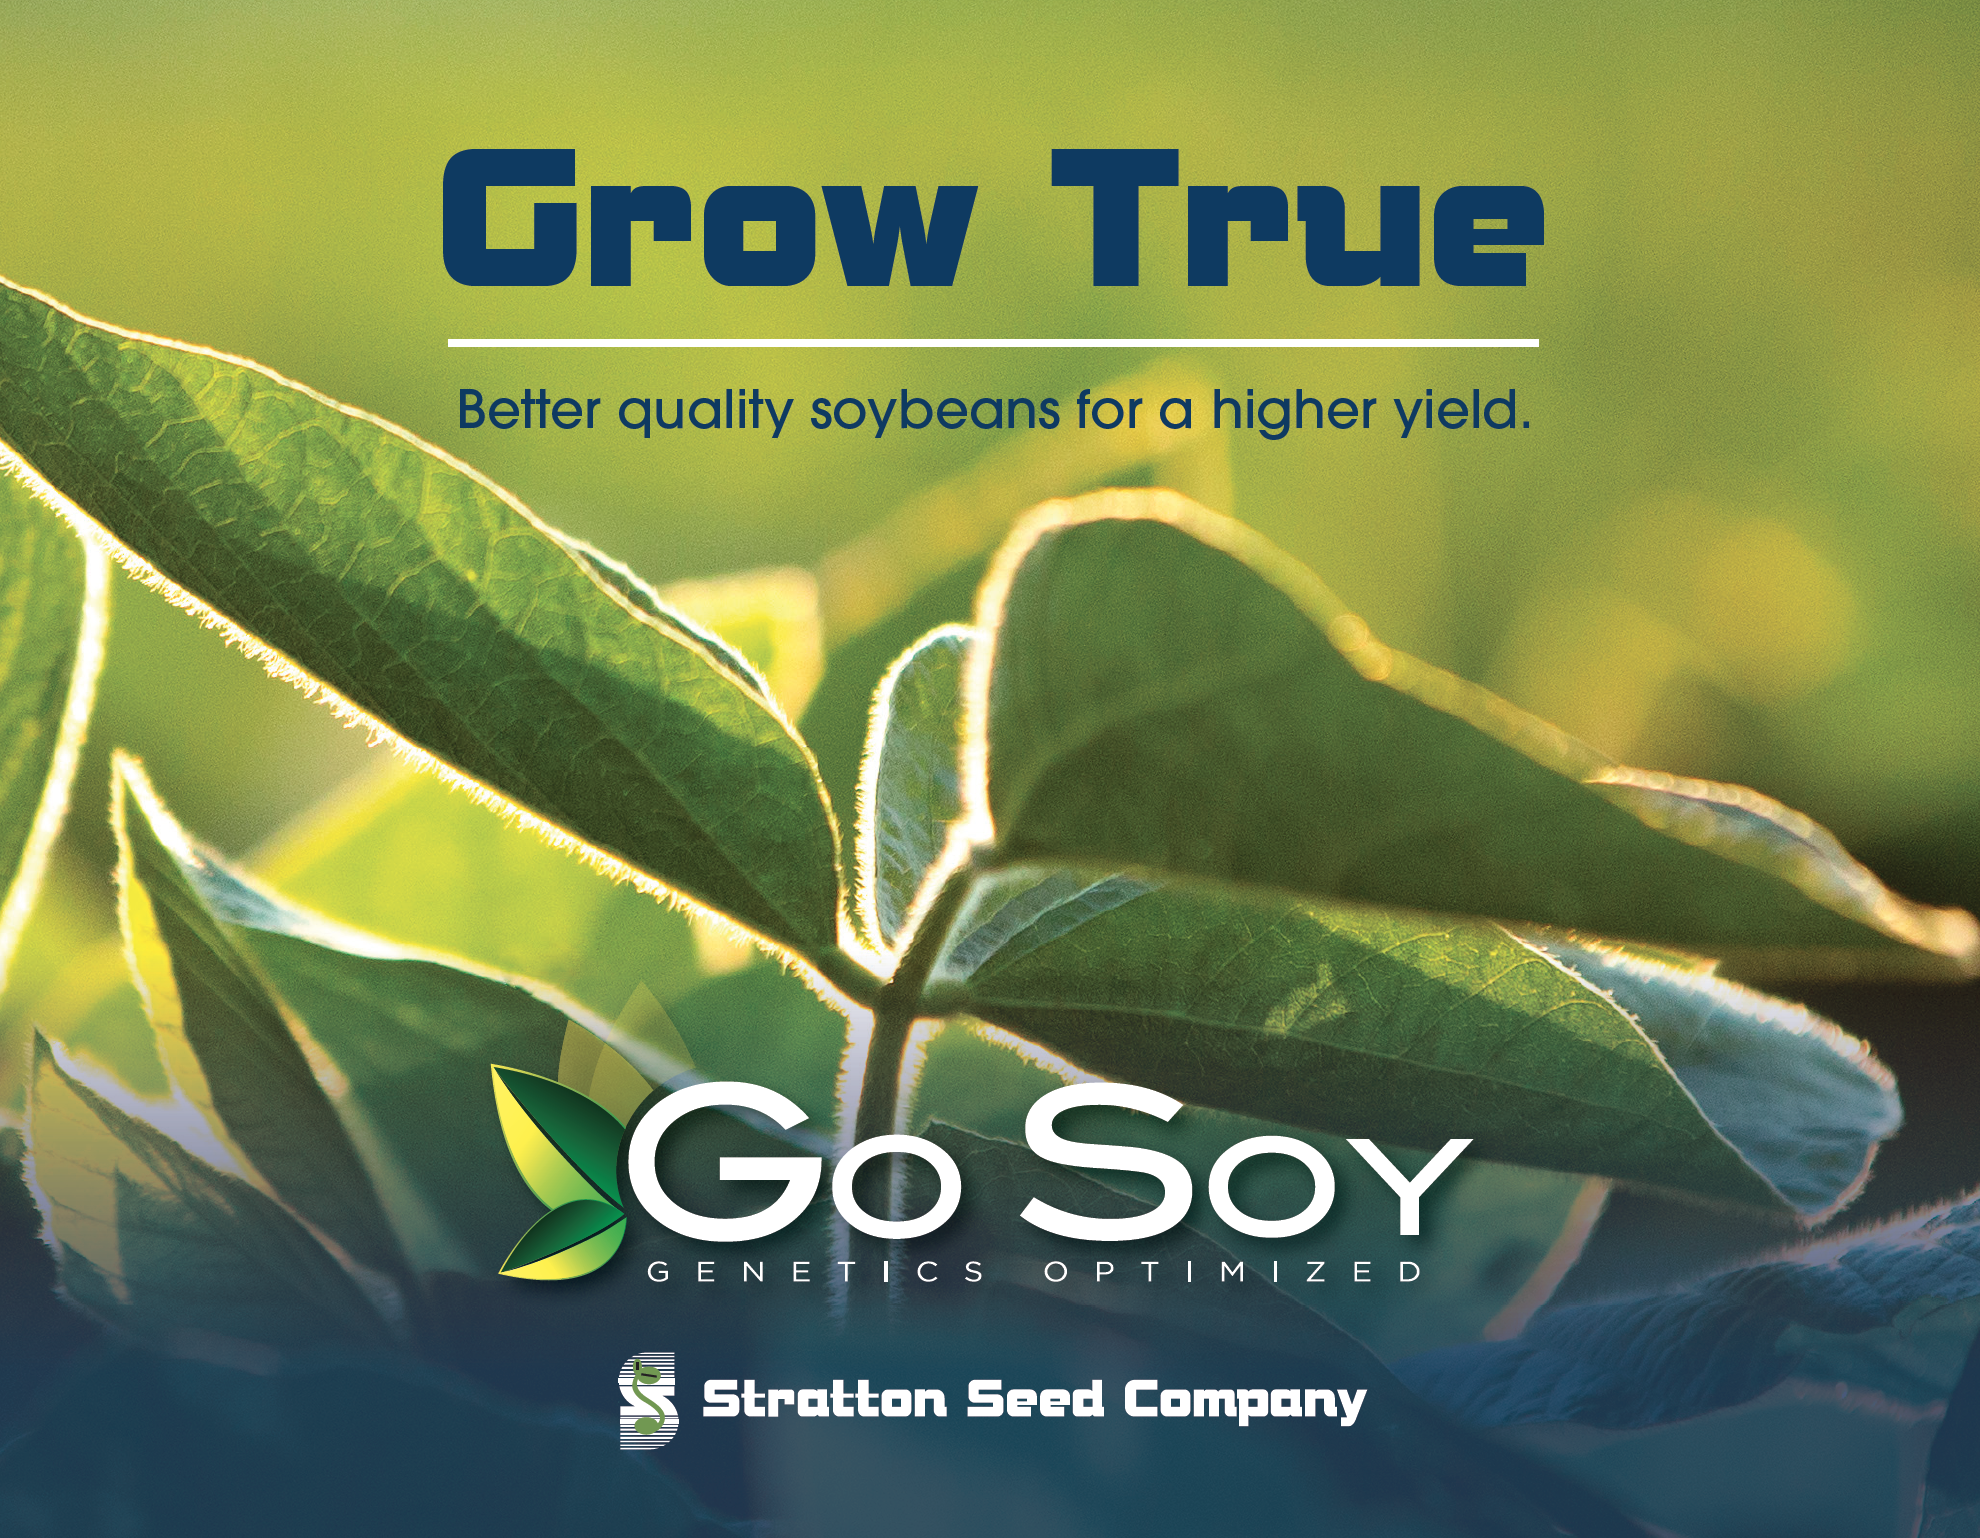 cover of brochure showing close up of soybean and GoSoy logo